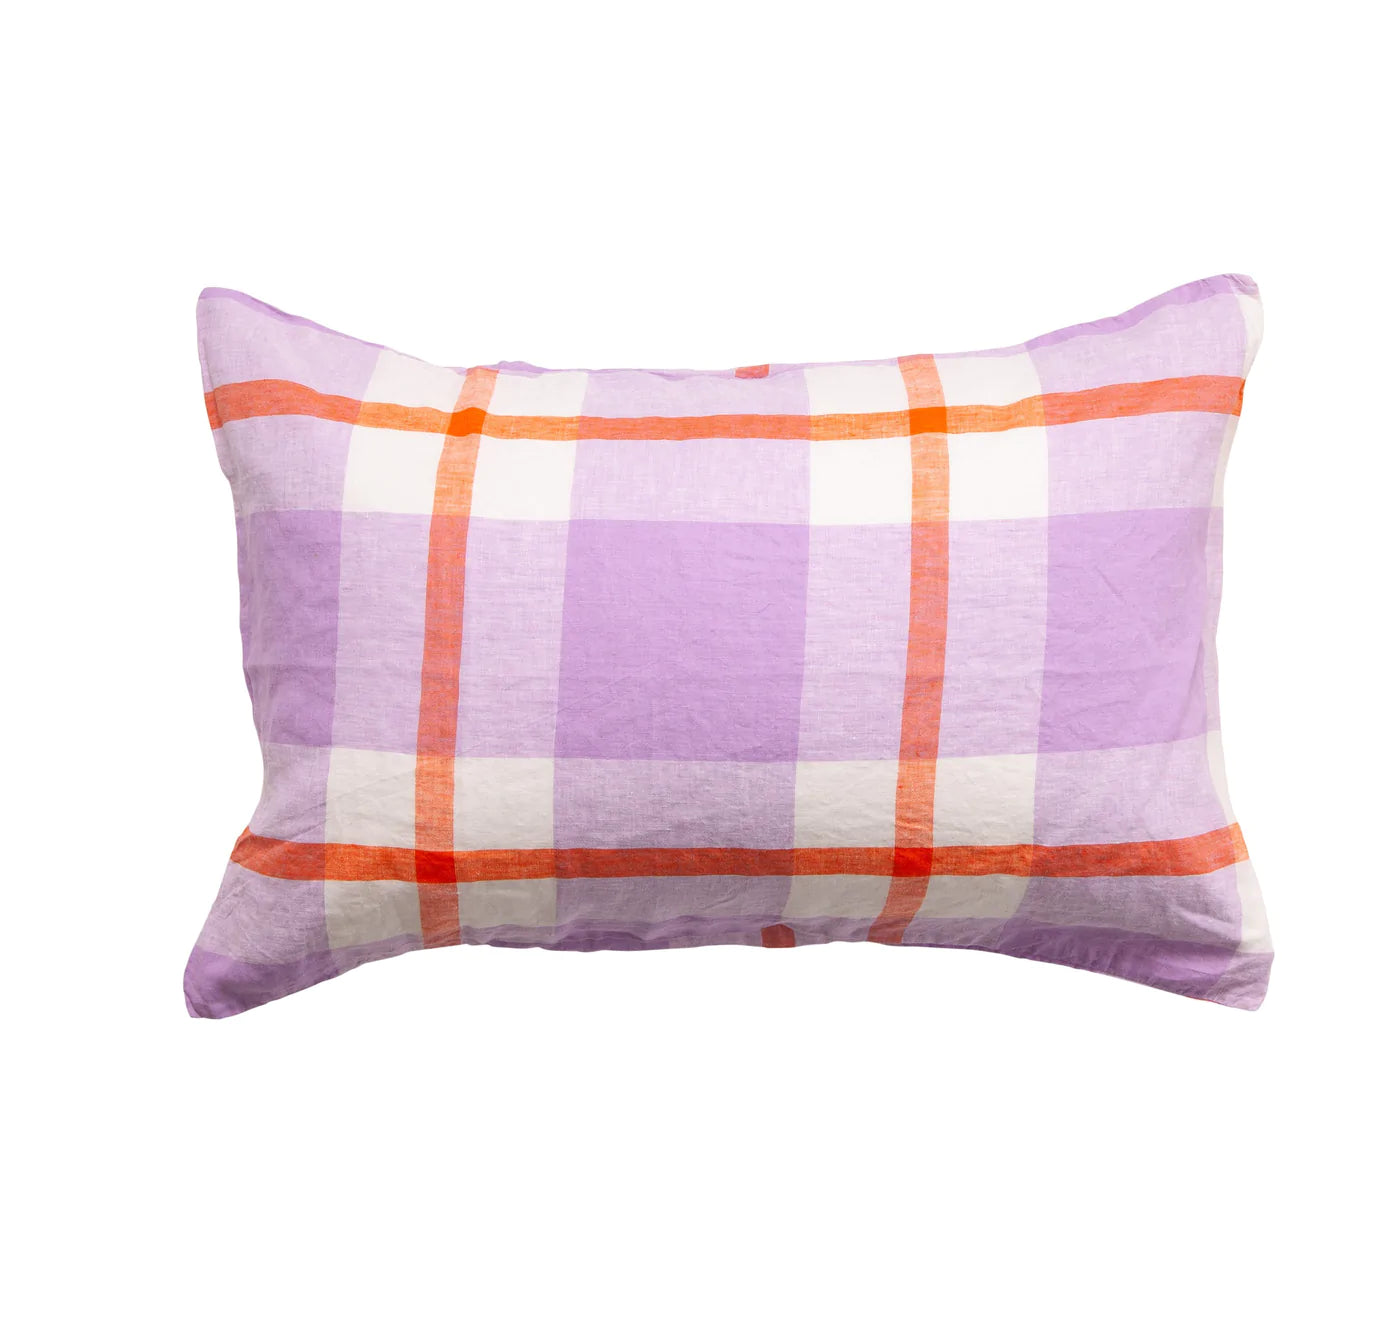 Pair of Linen Pillowcases - Thistle Check